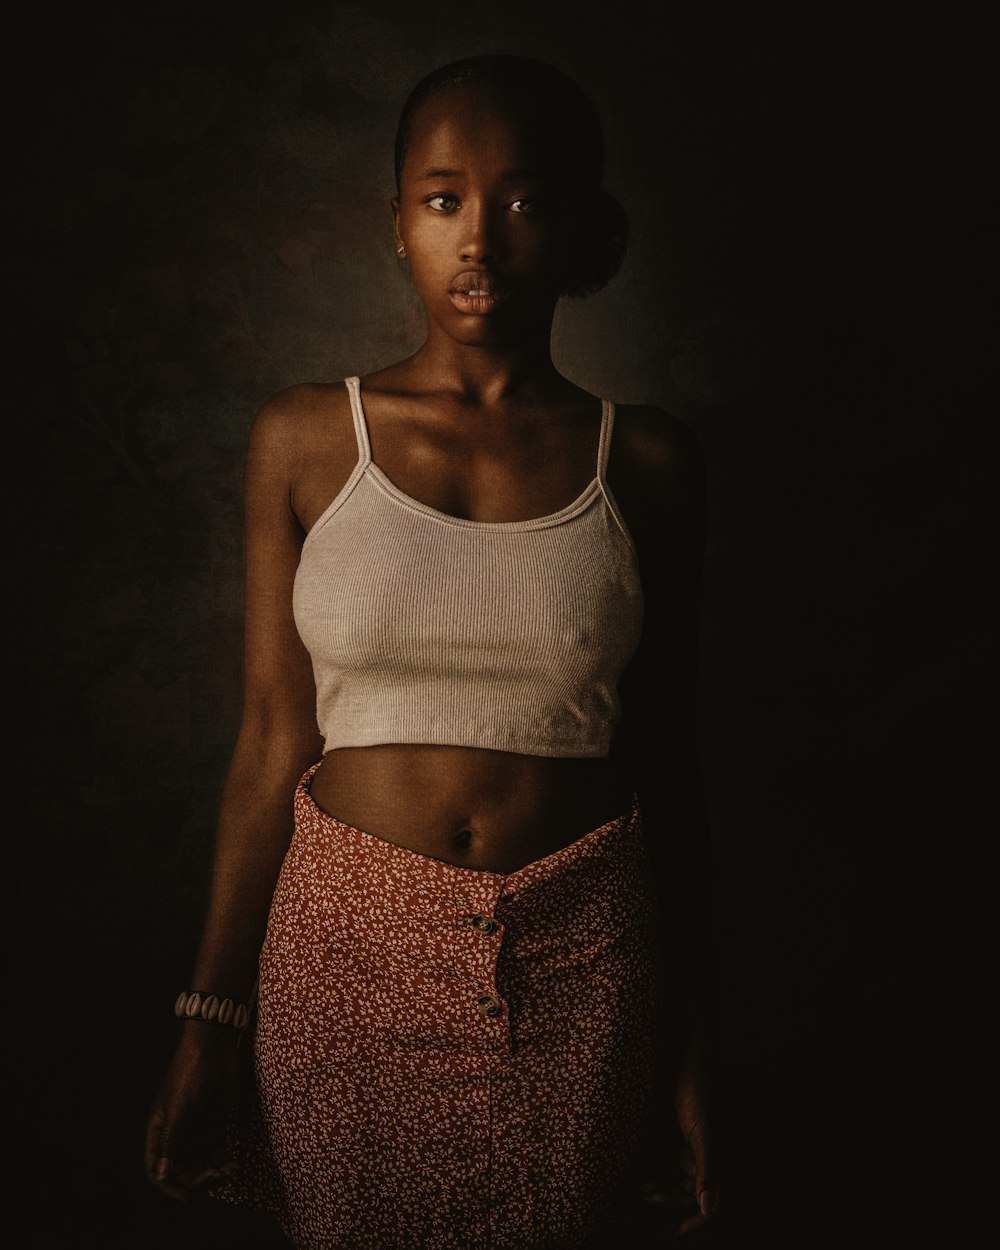 a woman standing in a dark room wearing a white tank top